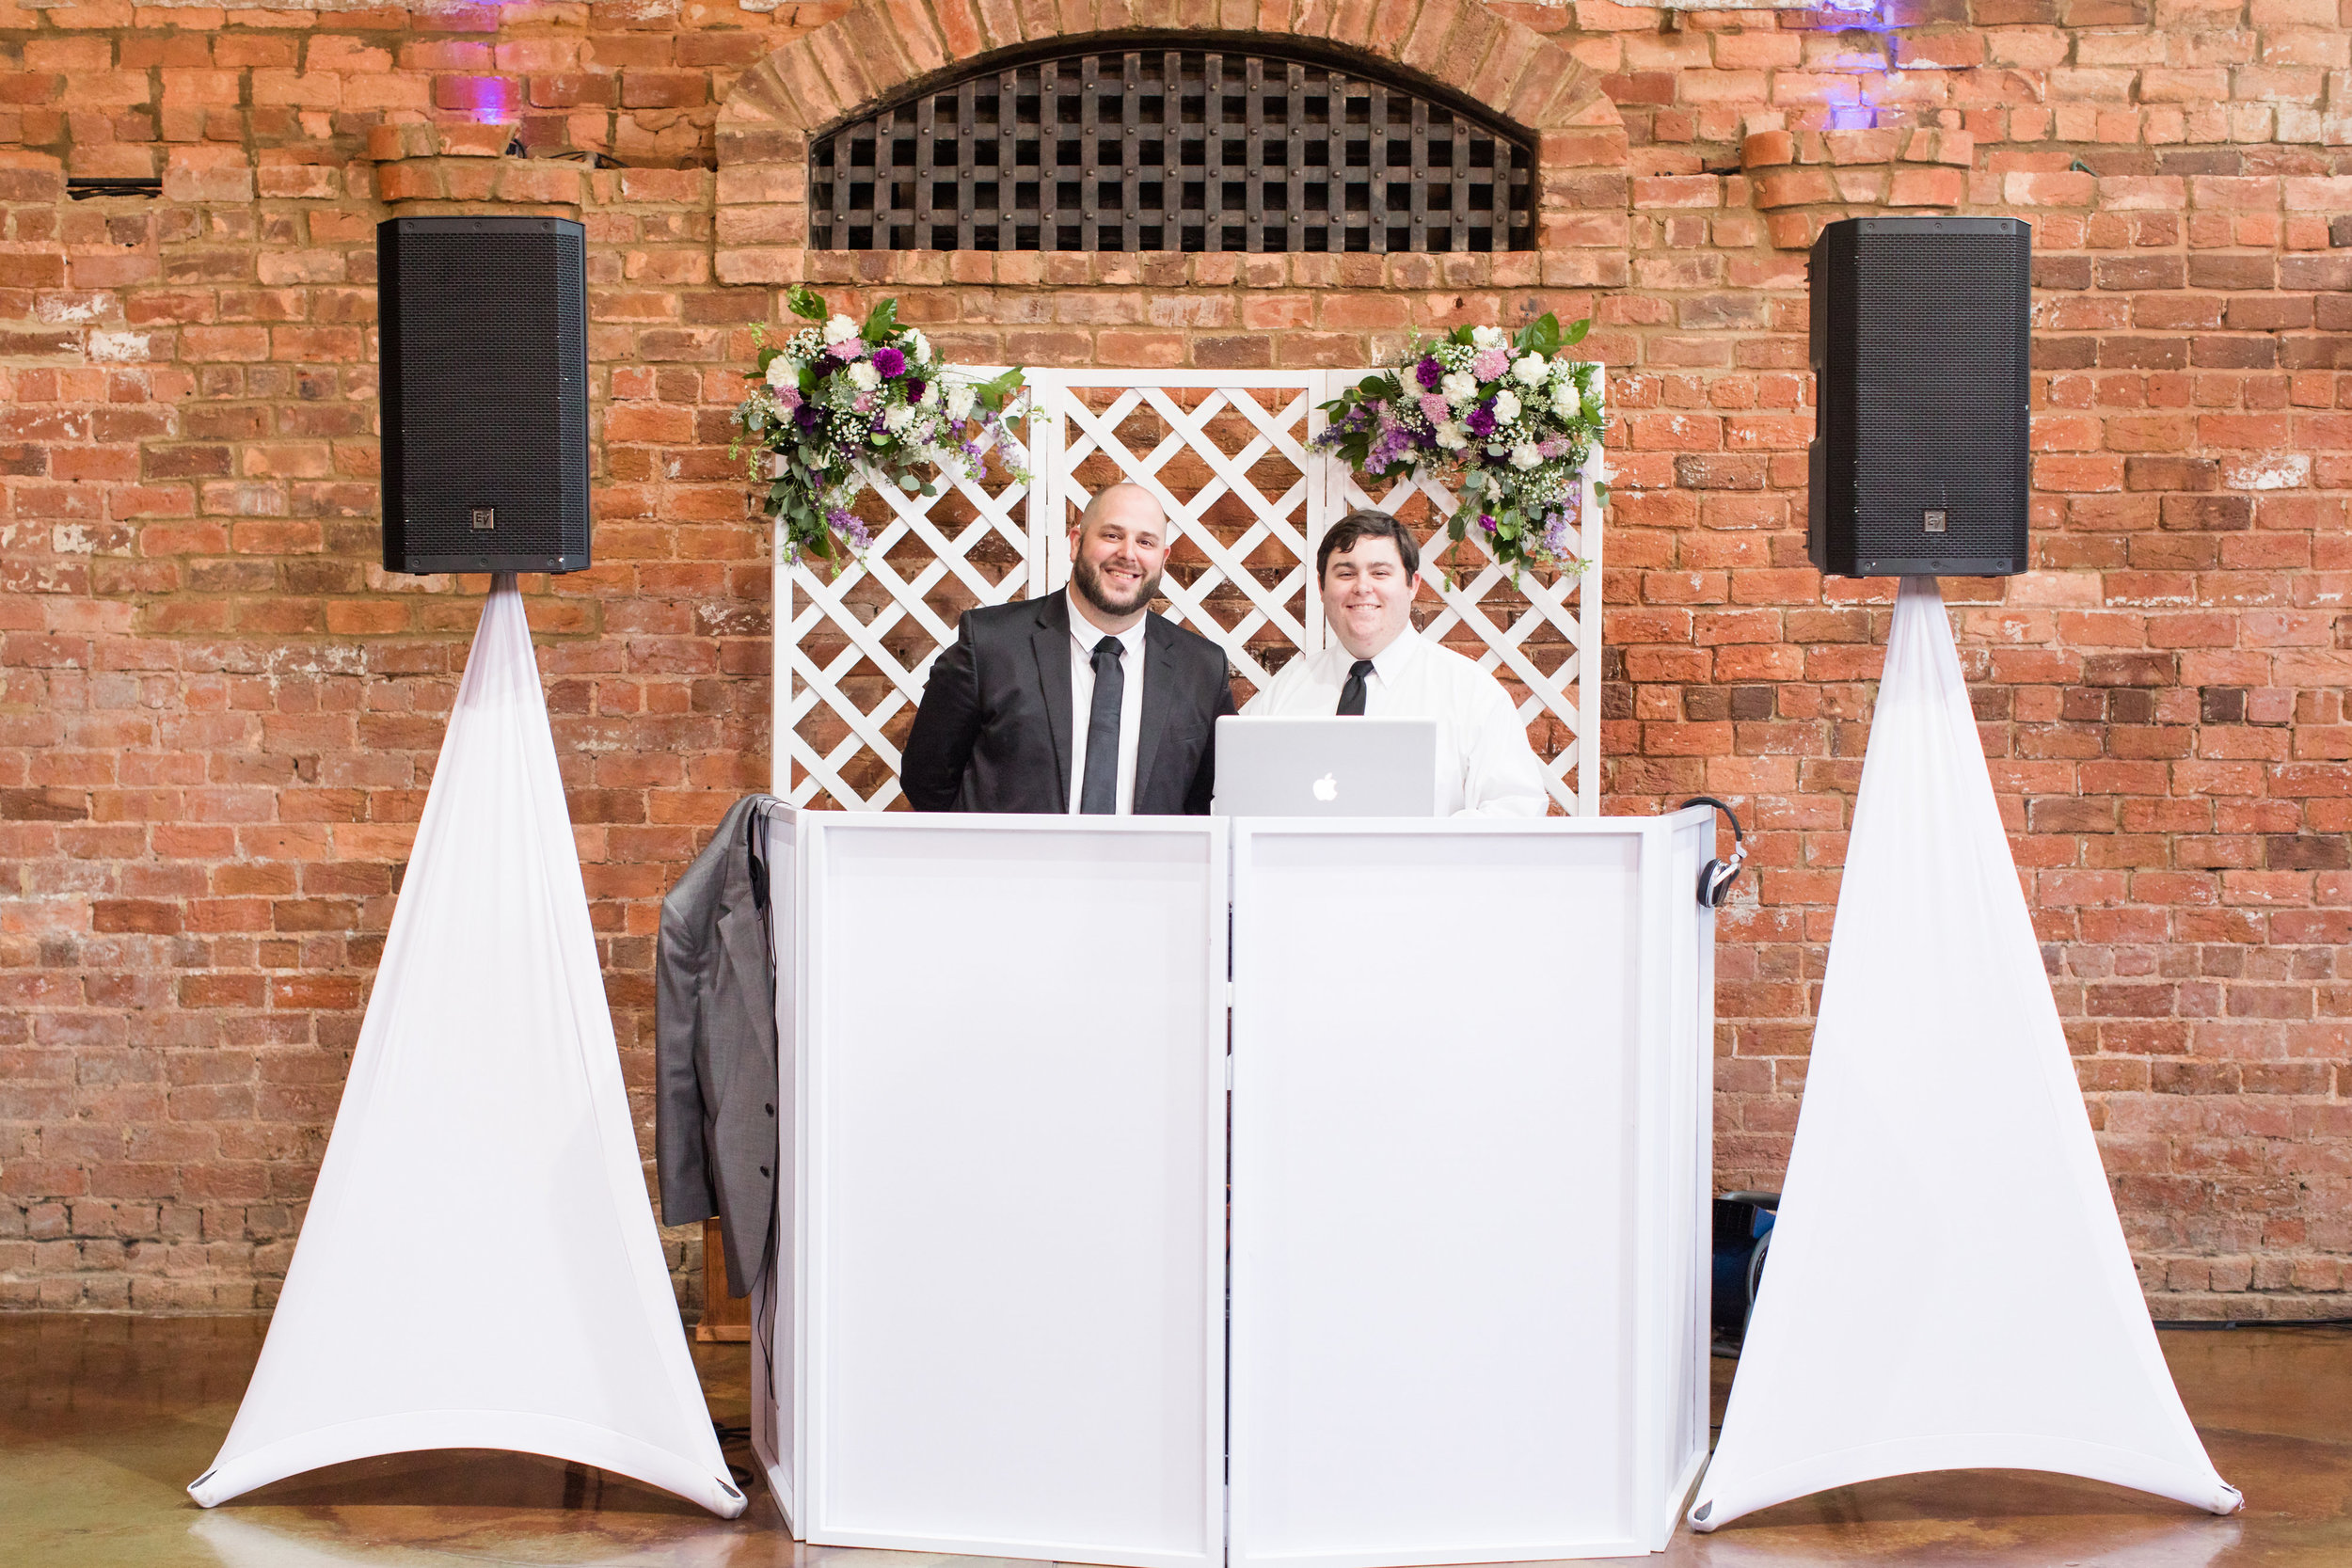  Alex and Will were the DJ's for their wedding celebration. 